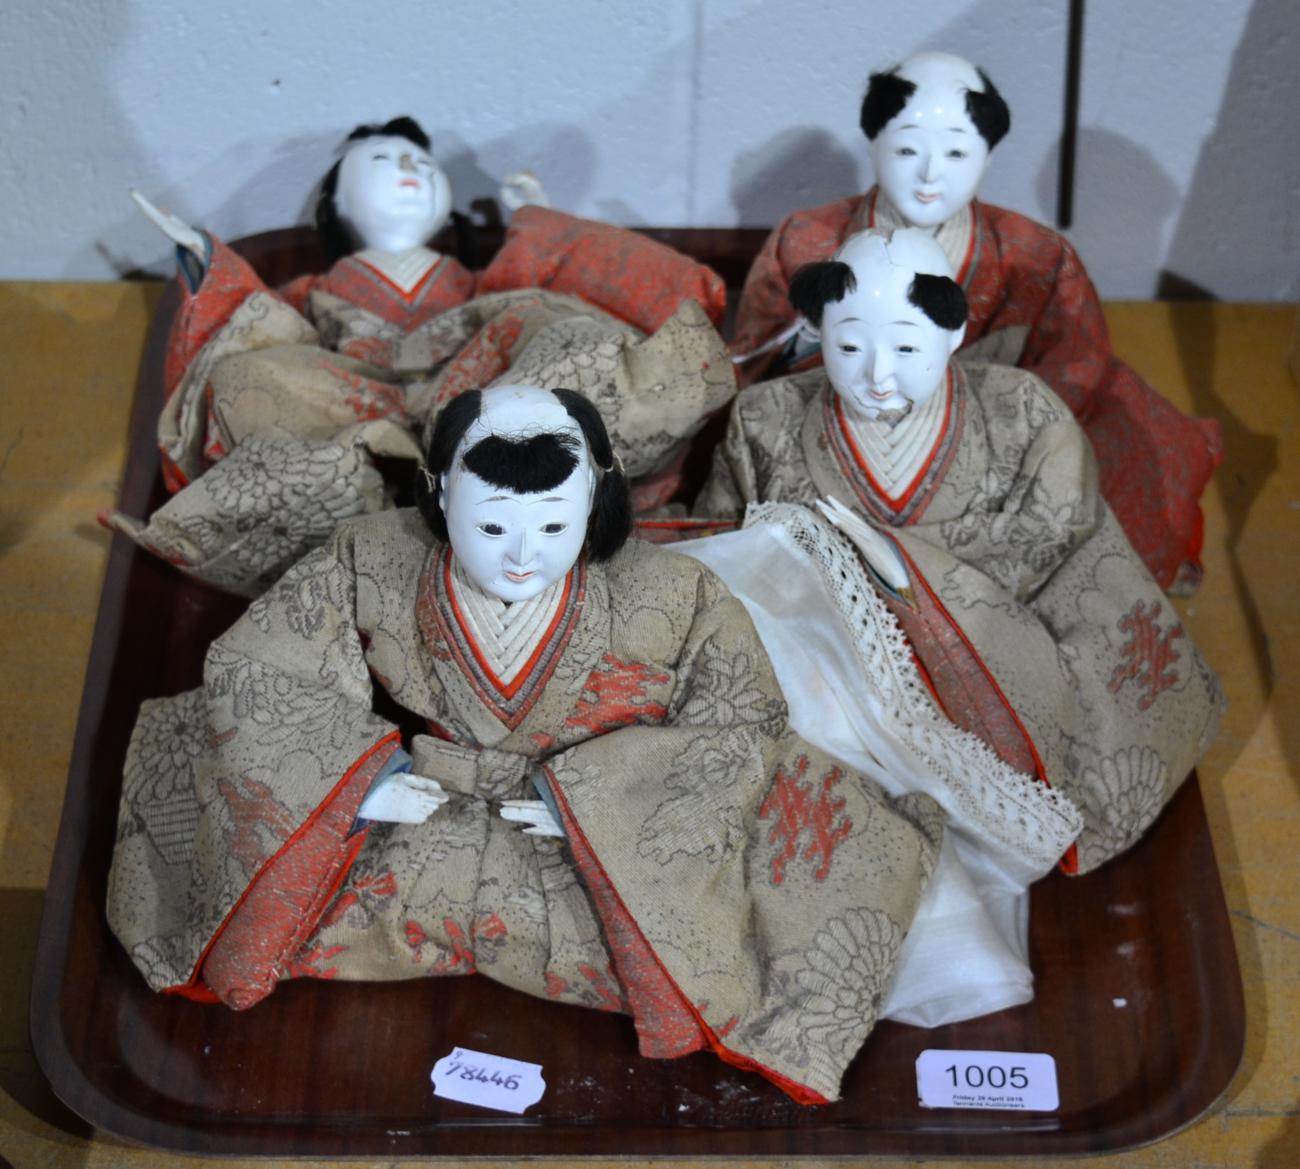 Four early 20th century Japanese seated figures, wearing brocade kimonos